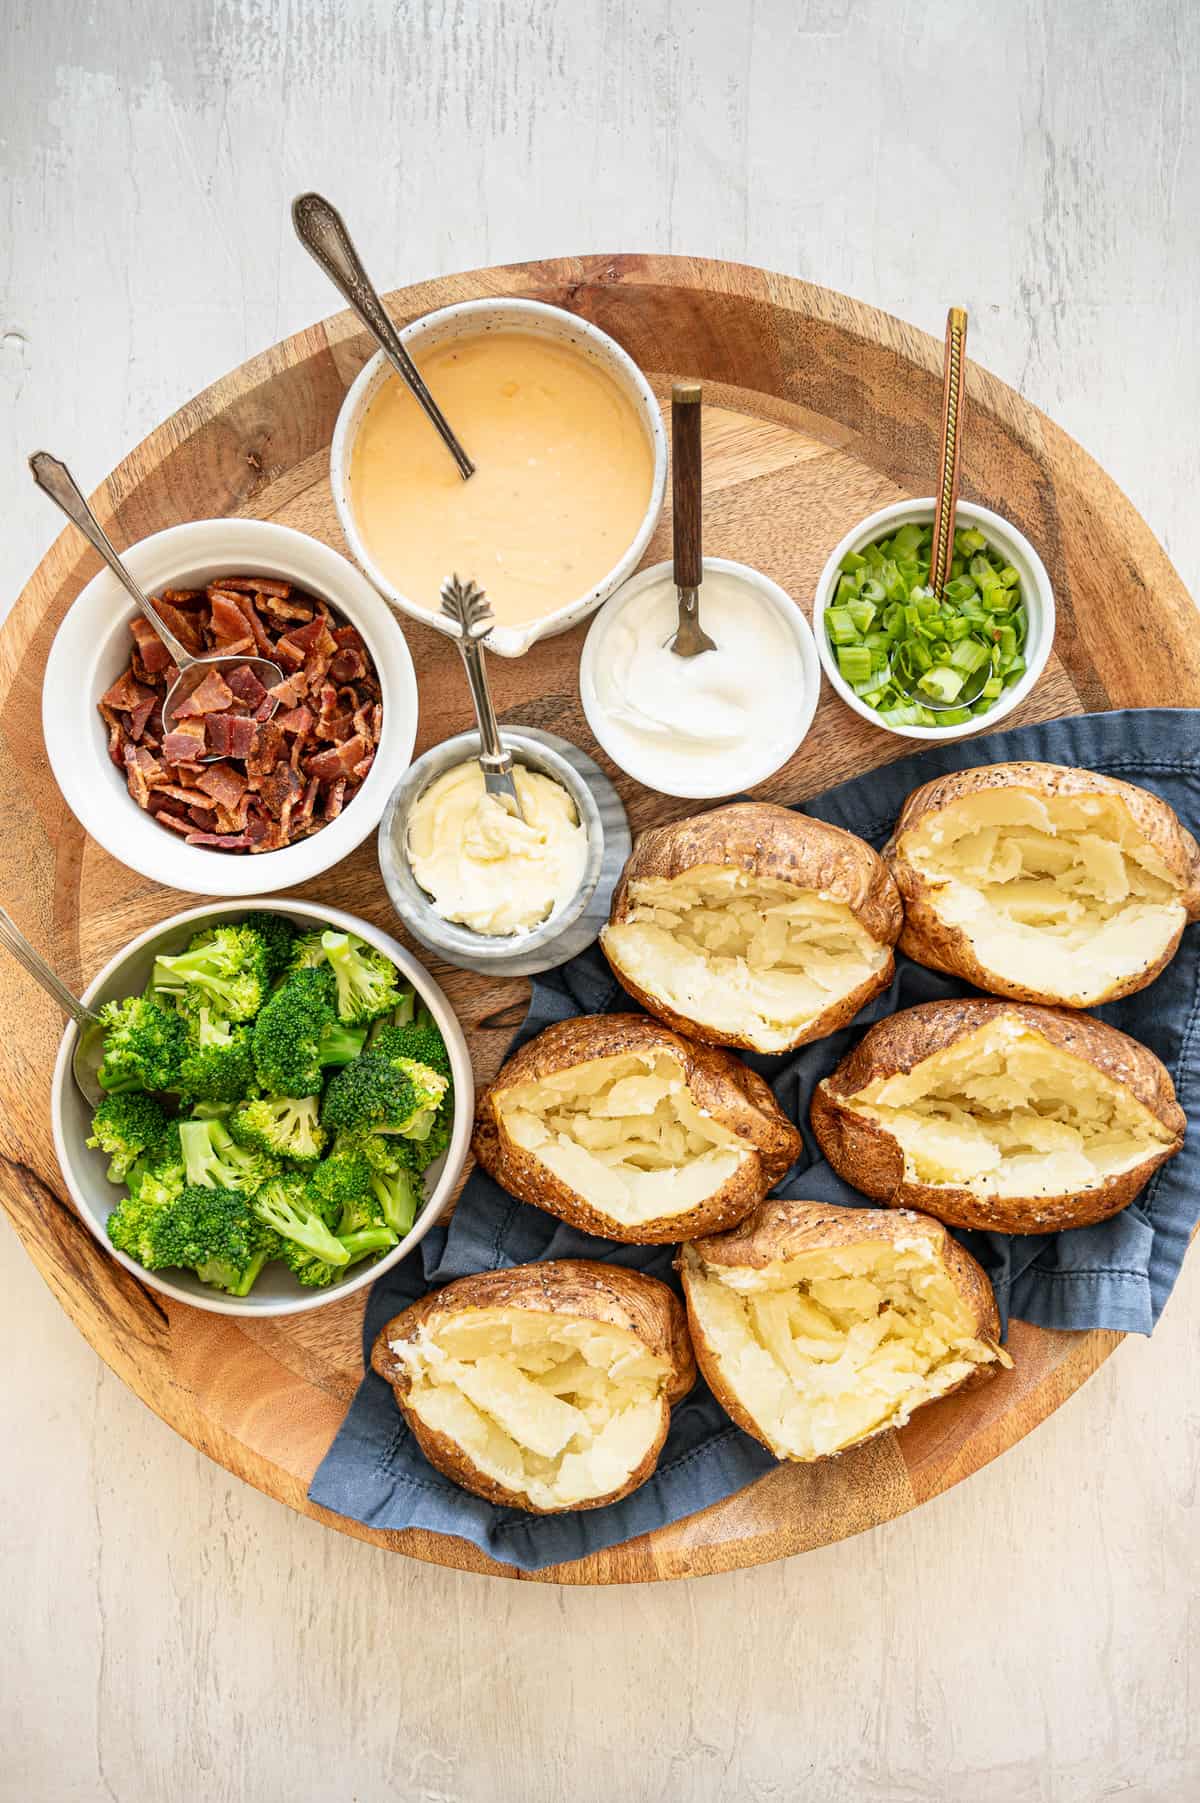 Baked potatoes and multiple toppings including chopped broccoli, homemade cheese sauce, sour cream, butter, chopped bacon, and scallions all laid out on a circular wooden cutting board.